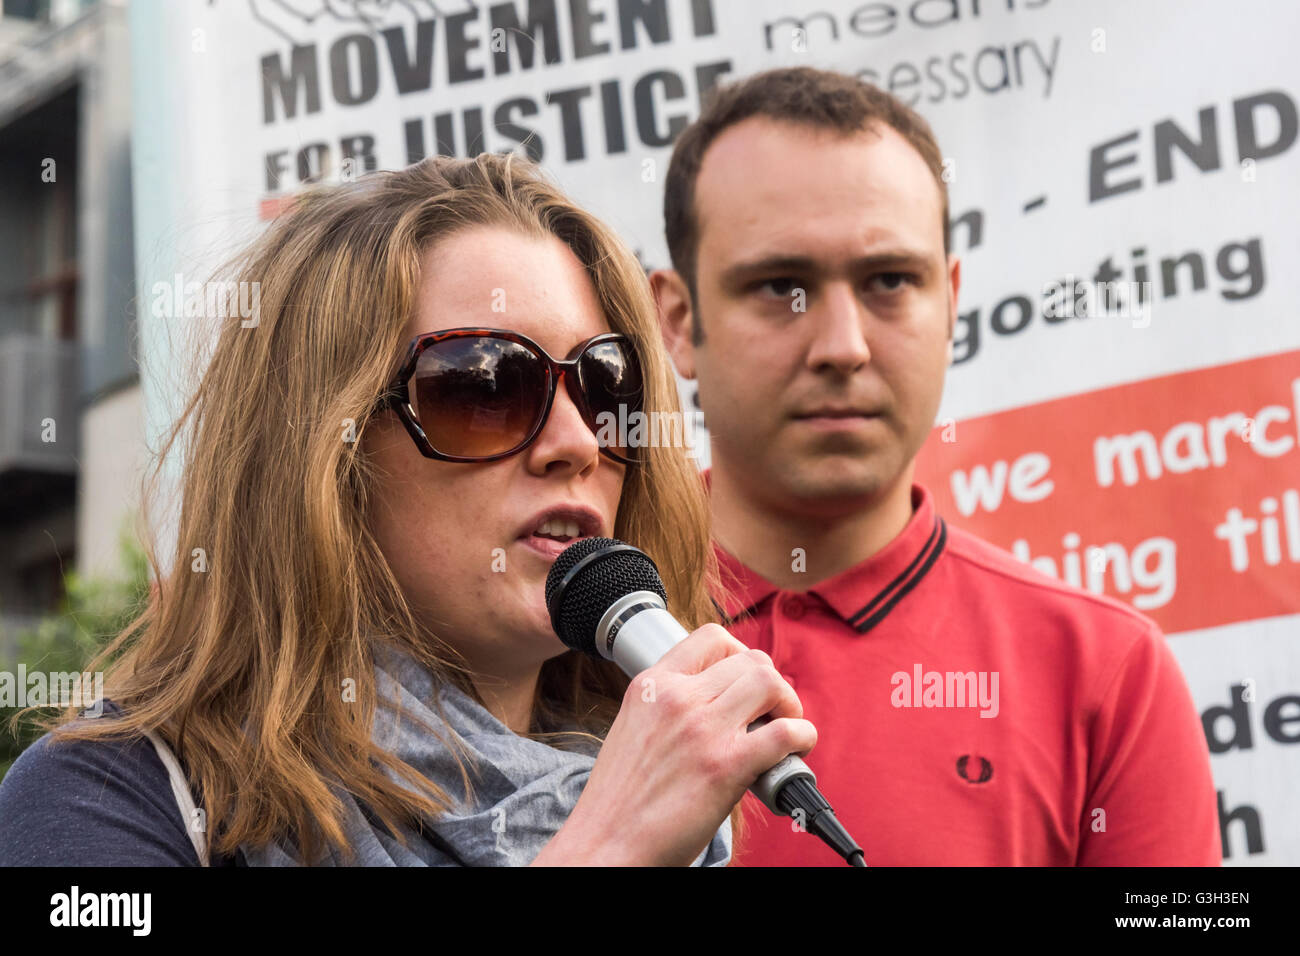 London, UK. June 24th 2016. Annie Cohen from the radical Jewish diaspora group Jewdas speaks at the rally in Altab Ali Park on the day after the UK voted to leave the EU against racism, for migrant rights and against fascist violence. They say that migration and immigrants have been attacked and scapegoated not only by both Remain and Leave campaigns but by mainstream parties and media over more than 20 years, stoking up hatred by insisting immigrants are a 'problem'.Peter Marshall/Alamy Live News Stock Photo